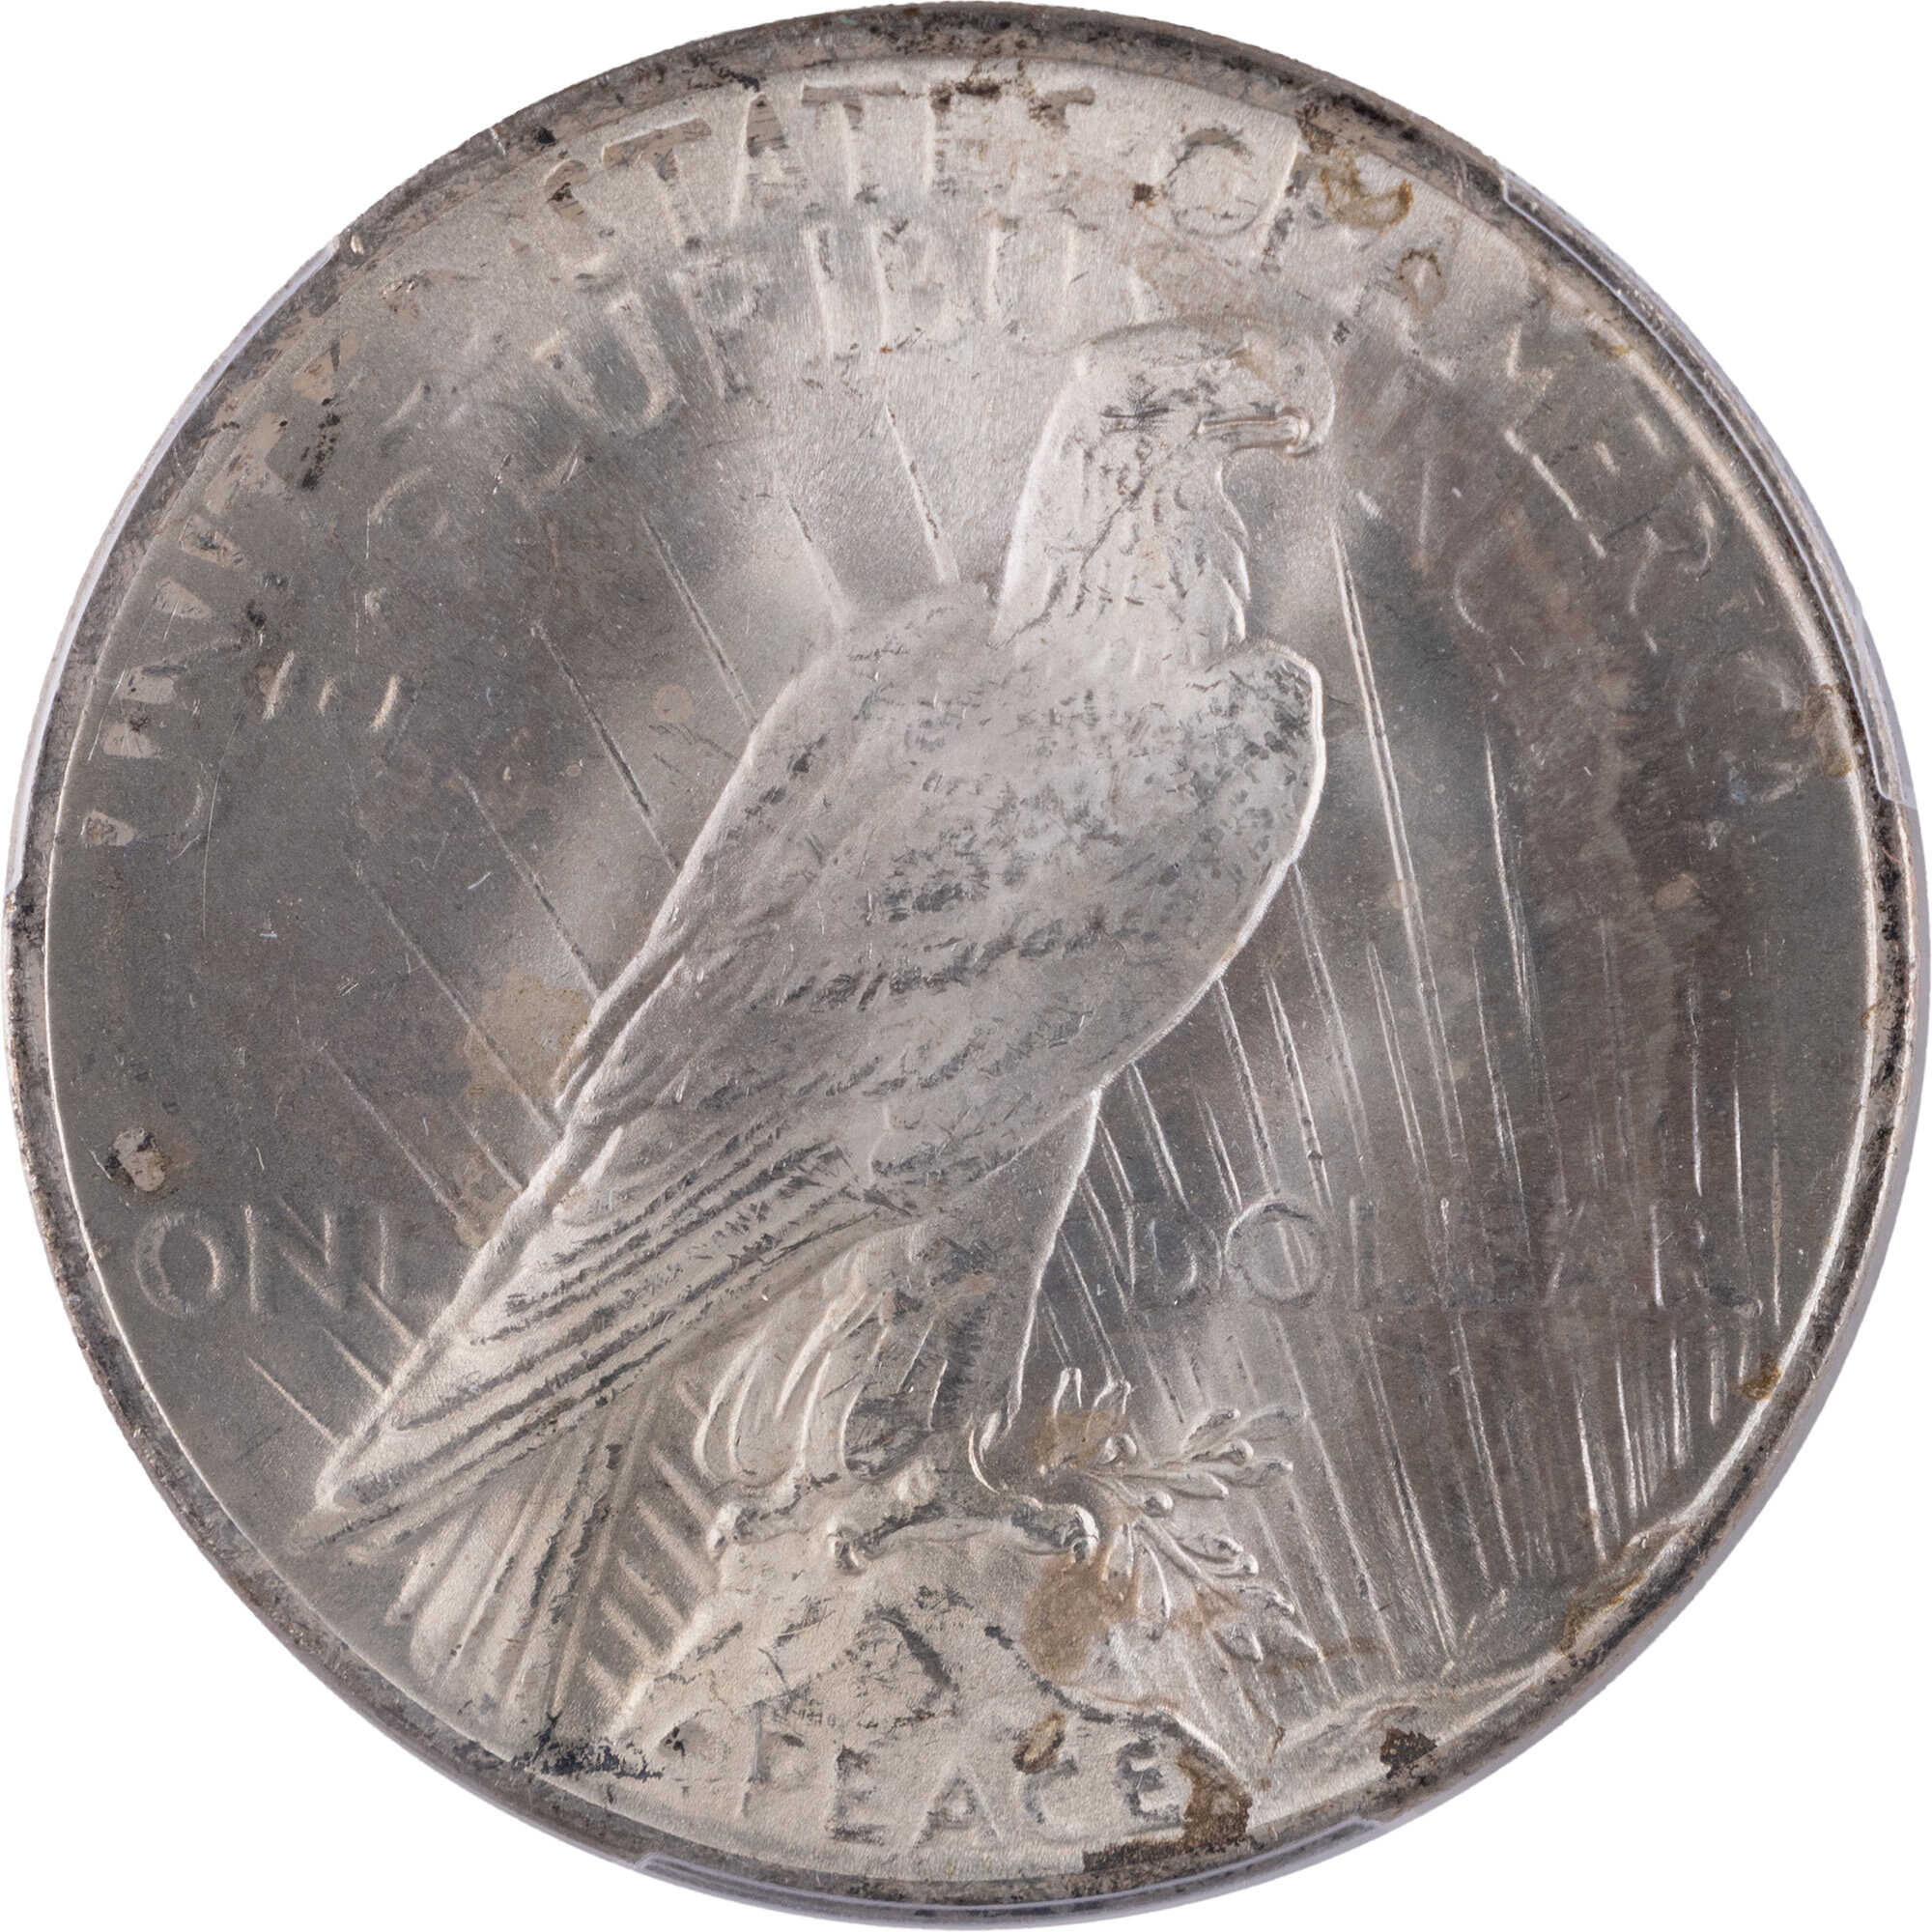 1923 Peace Dollar MS 64 PCGS Silver $1 Uncirculated Coin SKU:CPC12848